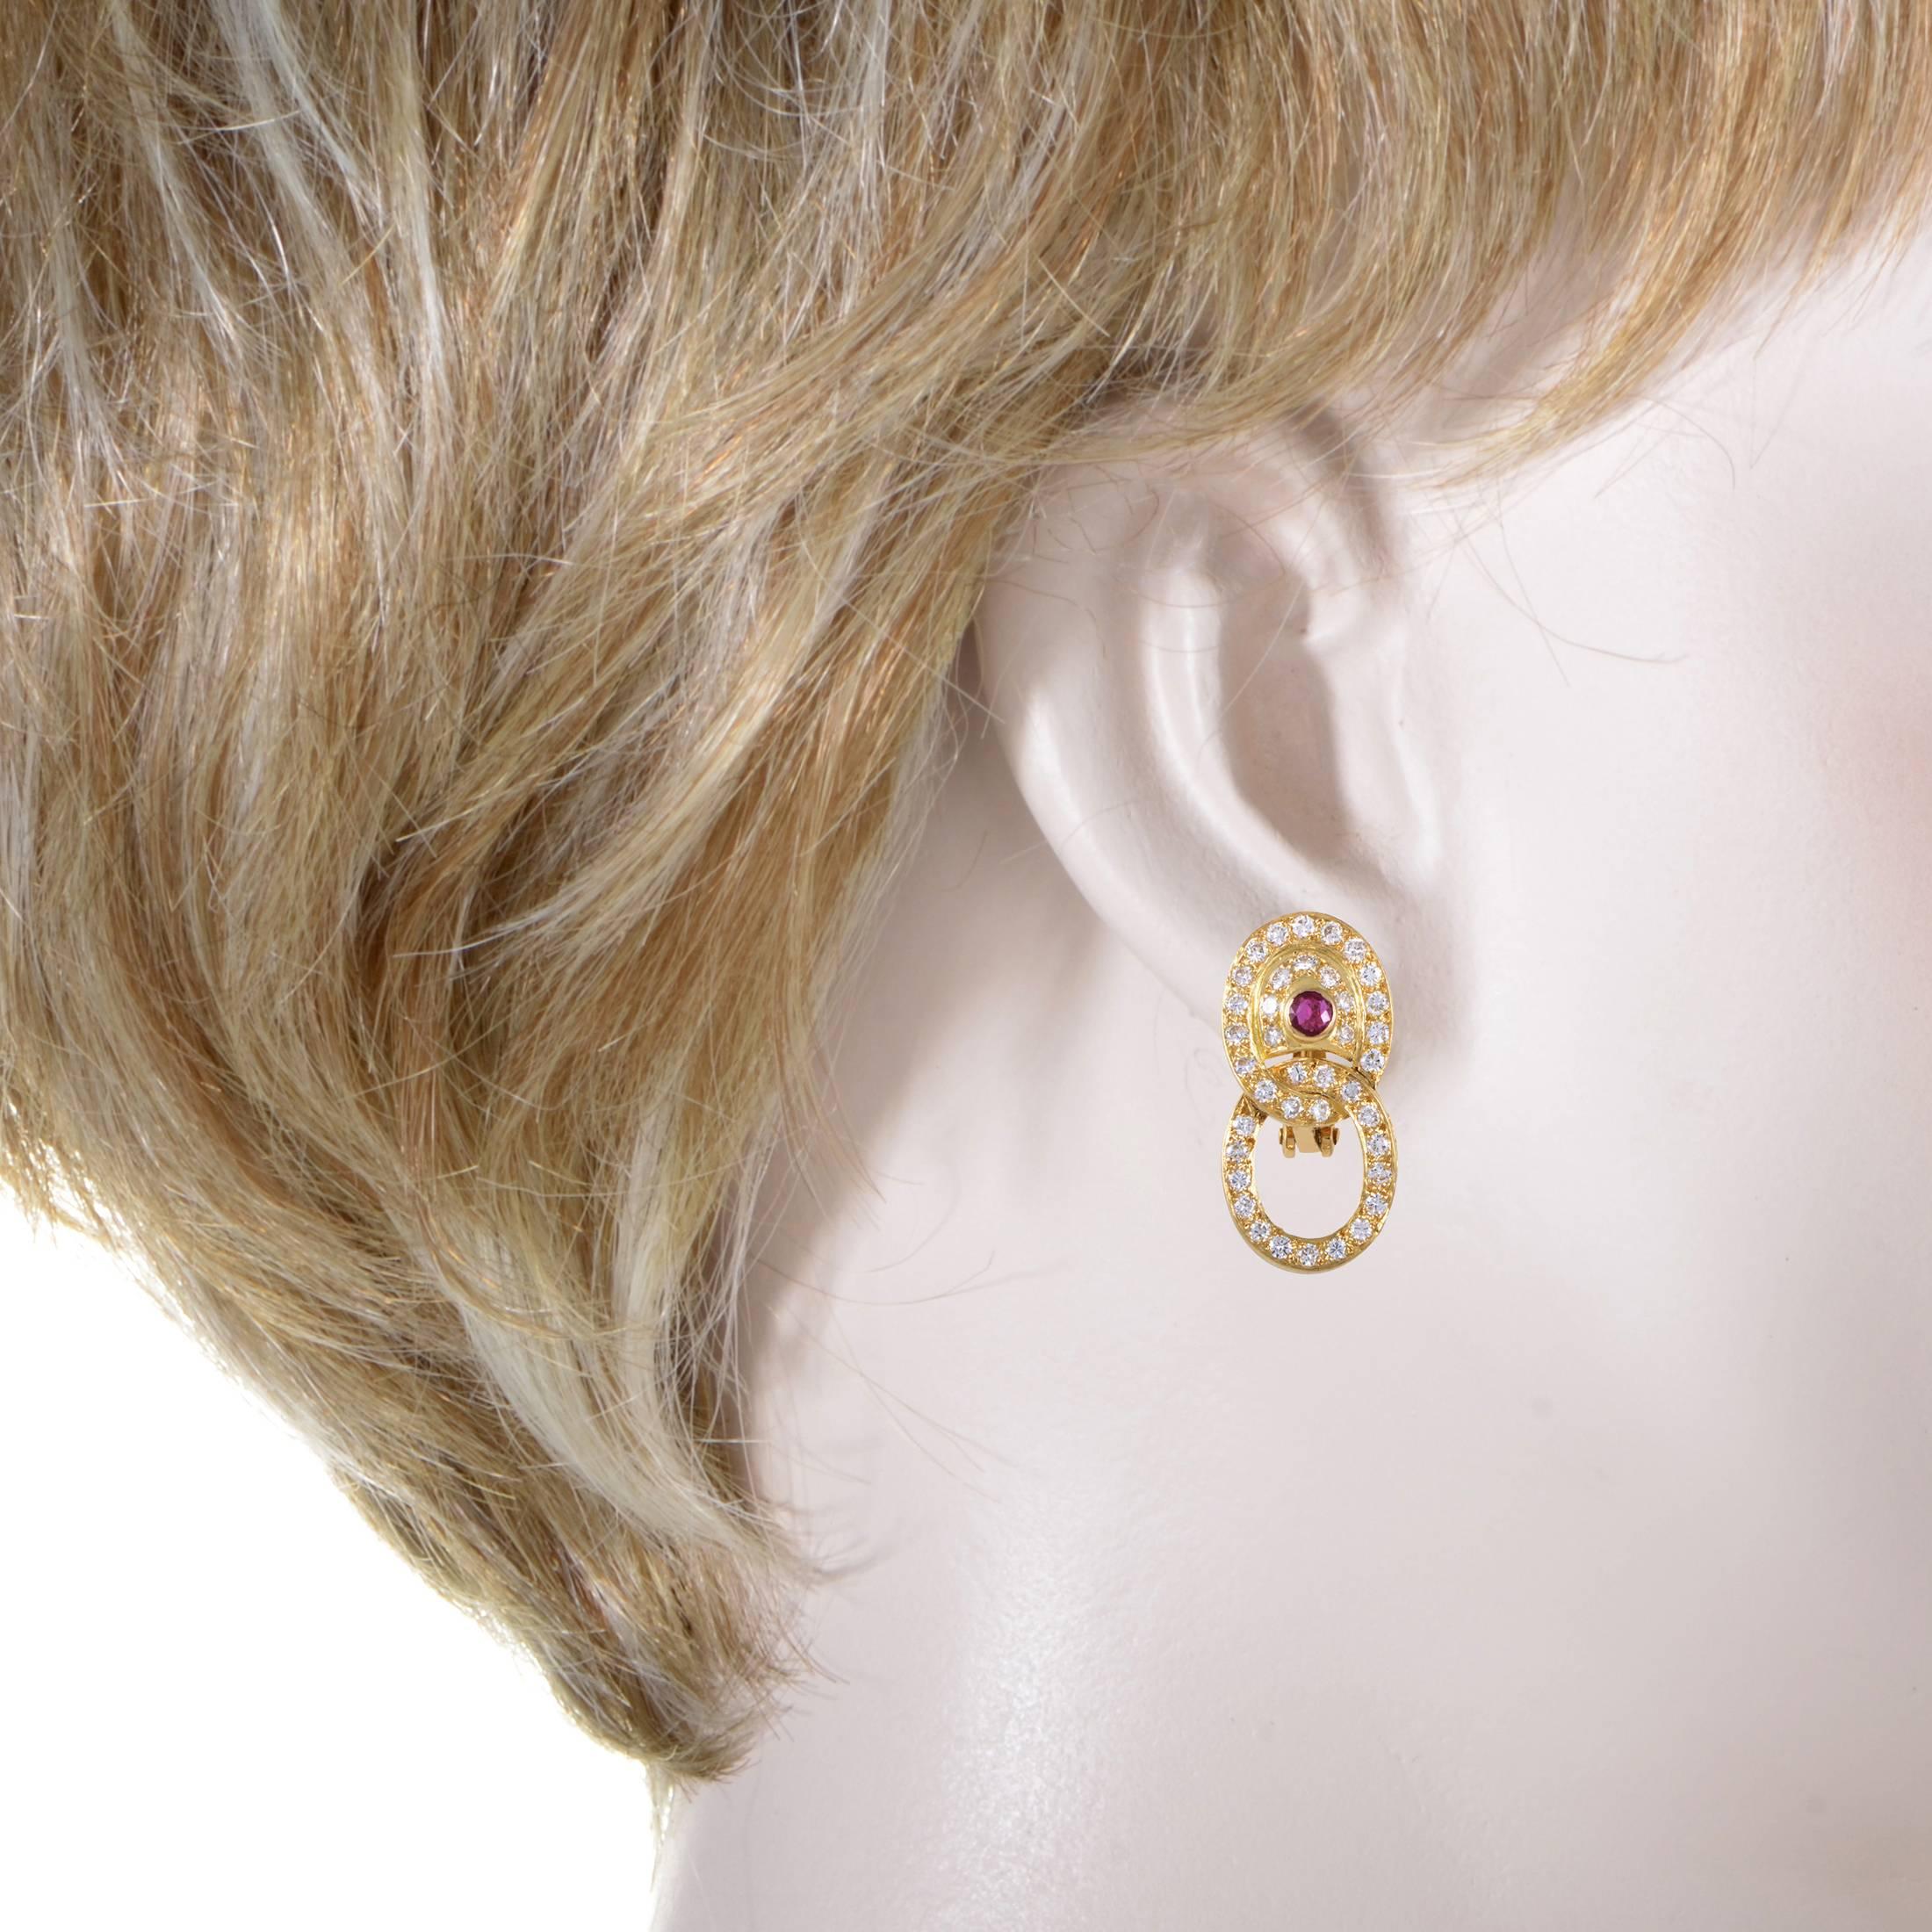 These earrings by Garrard present an eye-catching display. The design unites two 18K yellow gold hoops that are set with 1.25ct of pave diamonds through the contours. The top half of this dazzling performance is centered by a 0.15ct Ruby. These